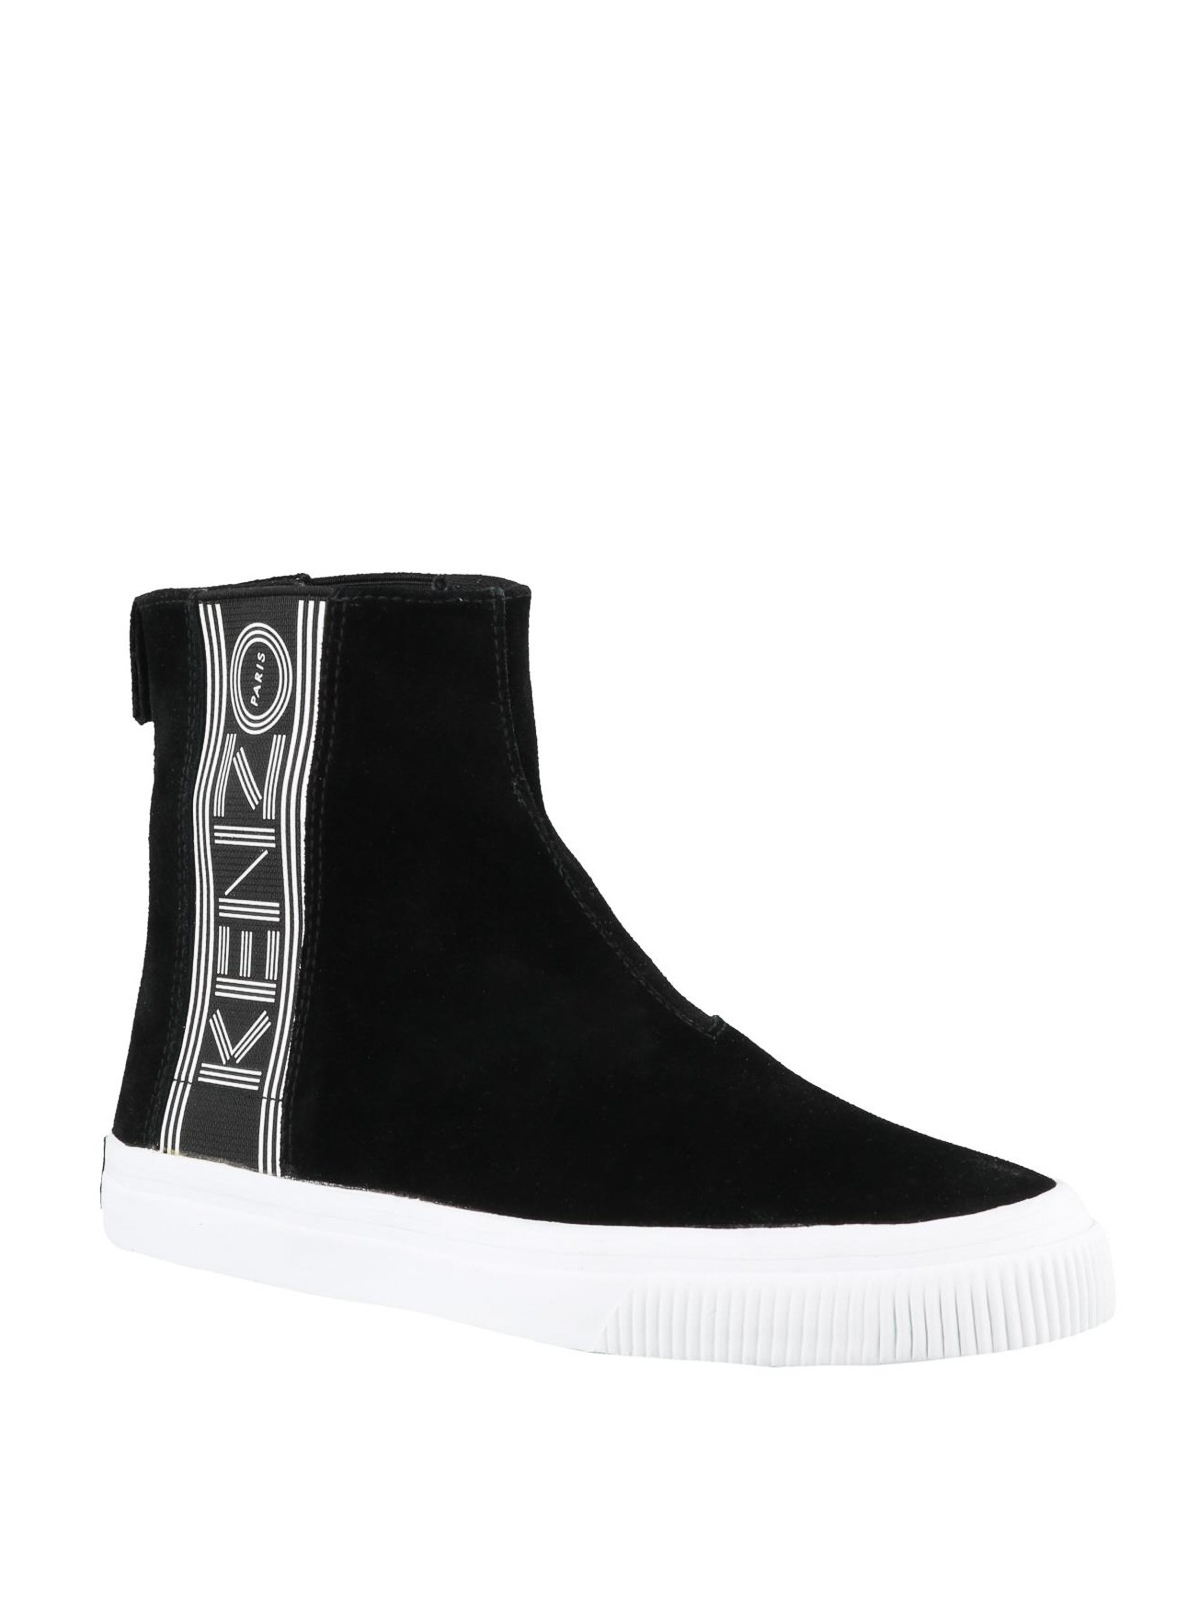 black suede slip on trainers